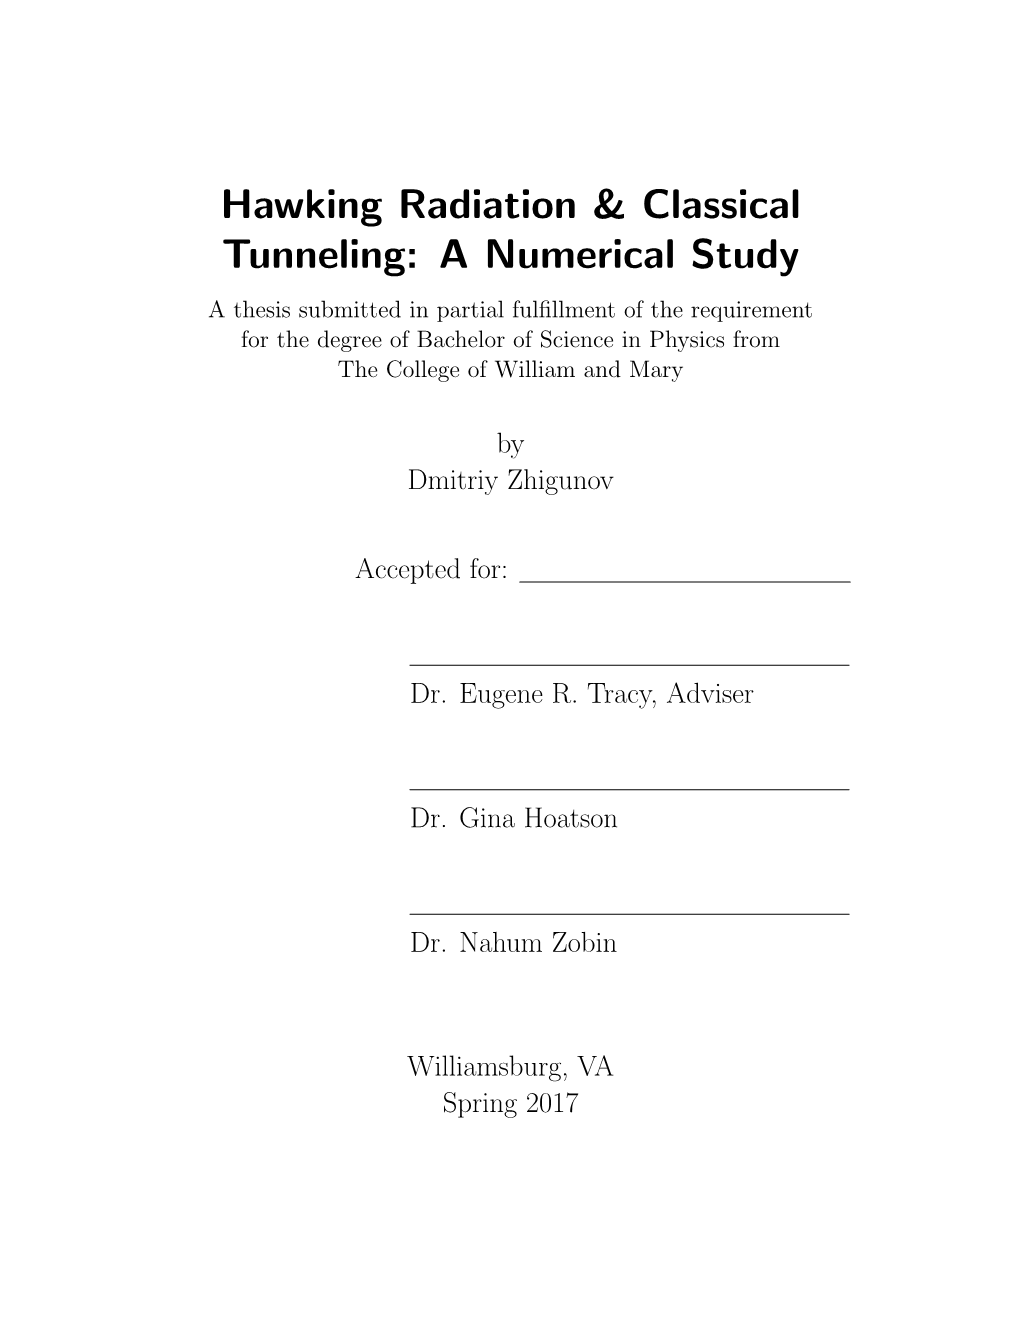 Hawking Radiation & Classical Tunneling: a Numerical Study